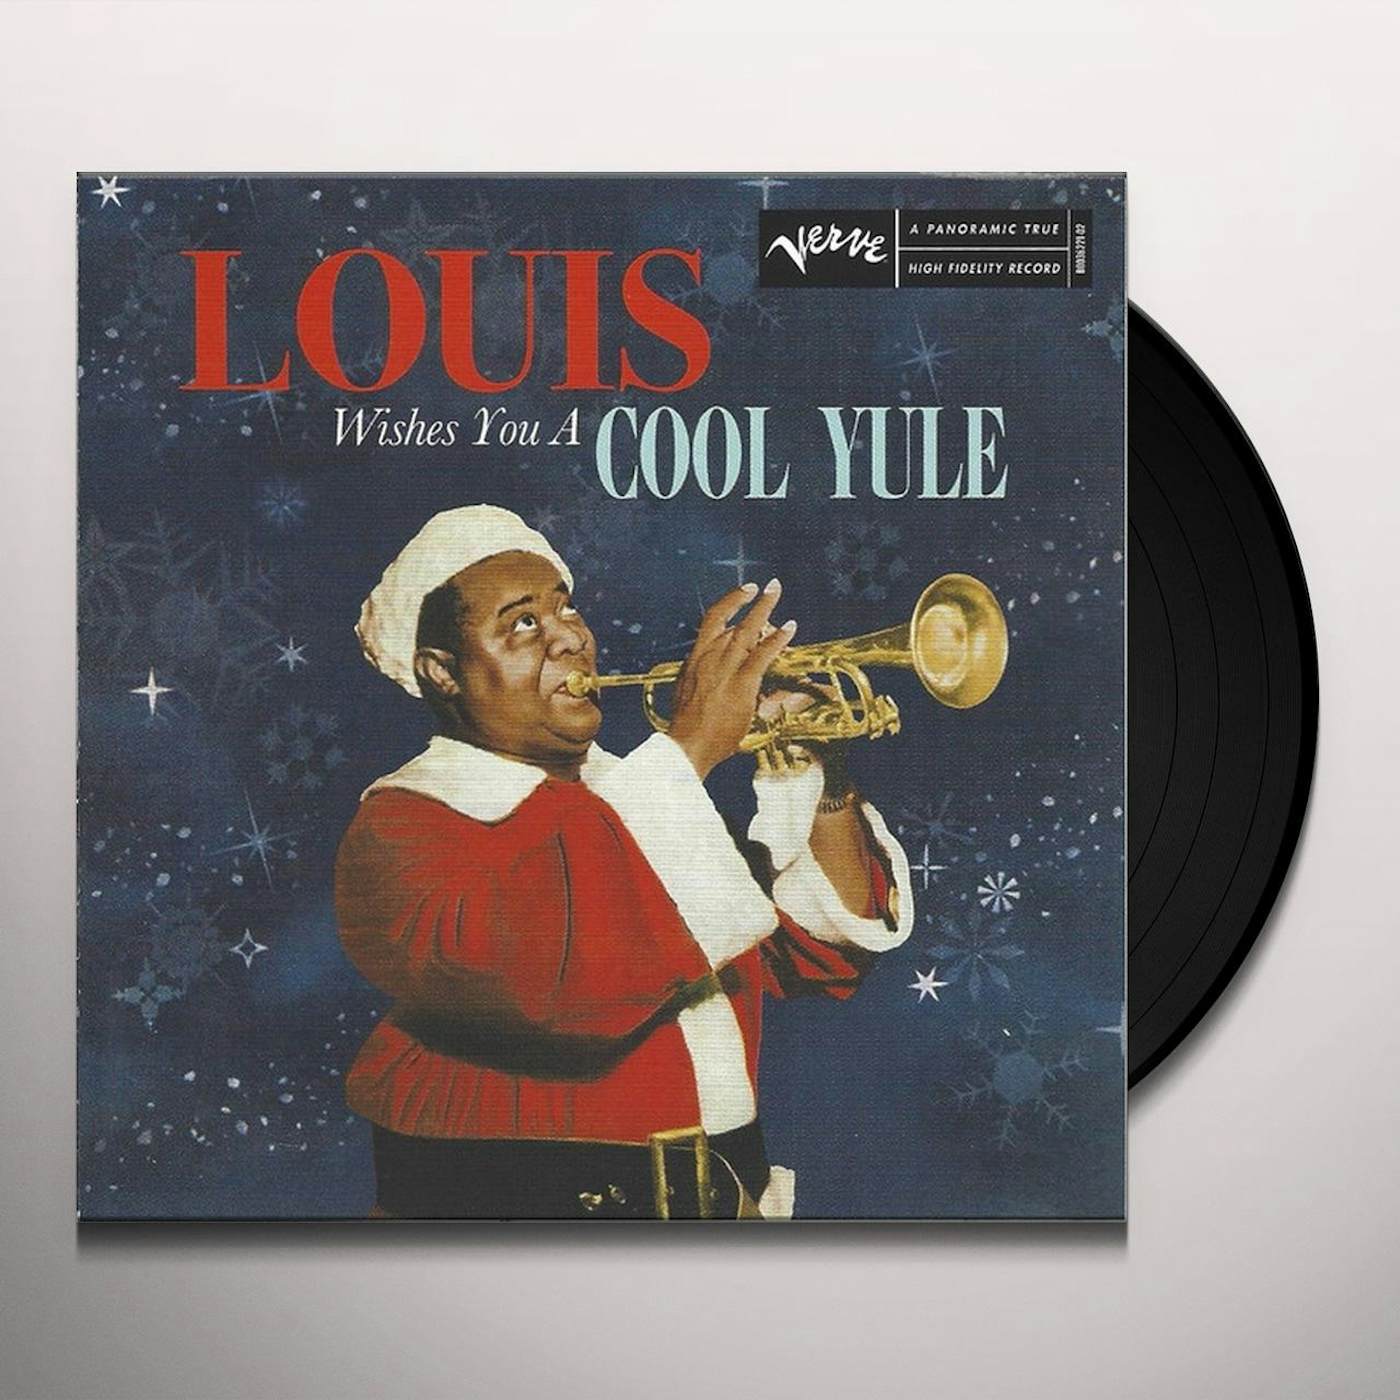 Louis Armstrong Albums Vinyl & LPs, Records